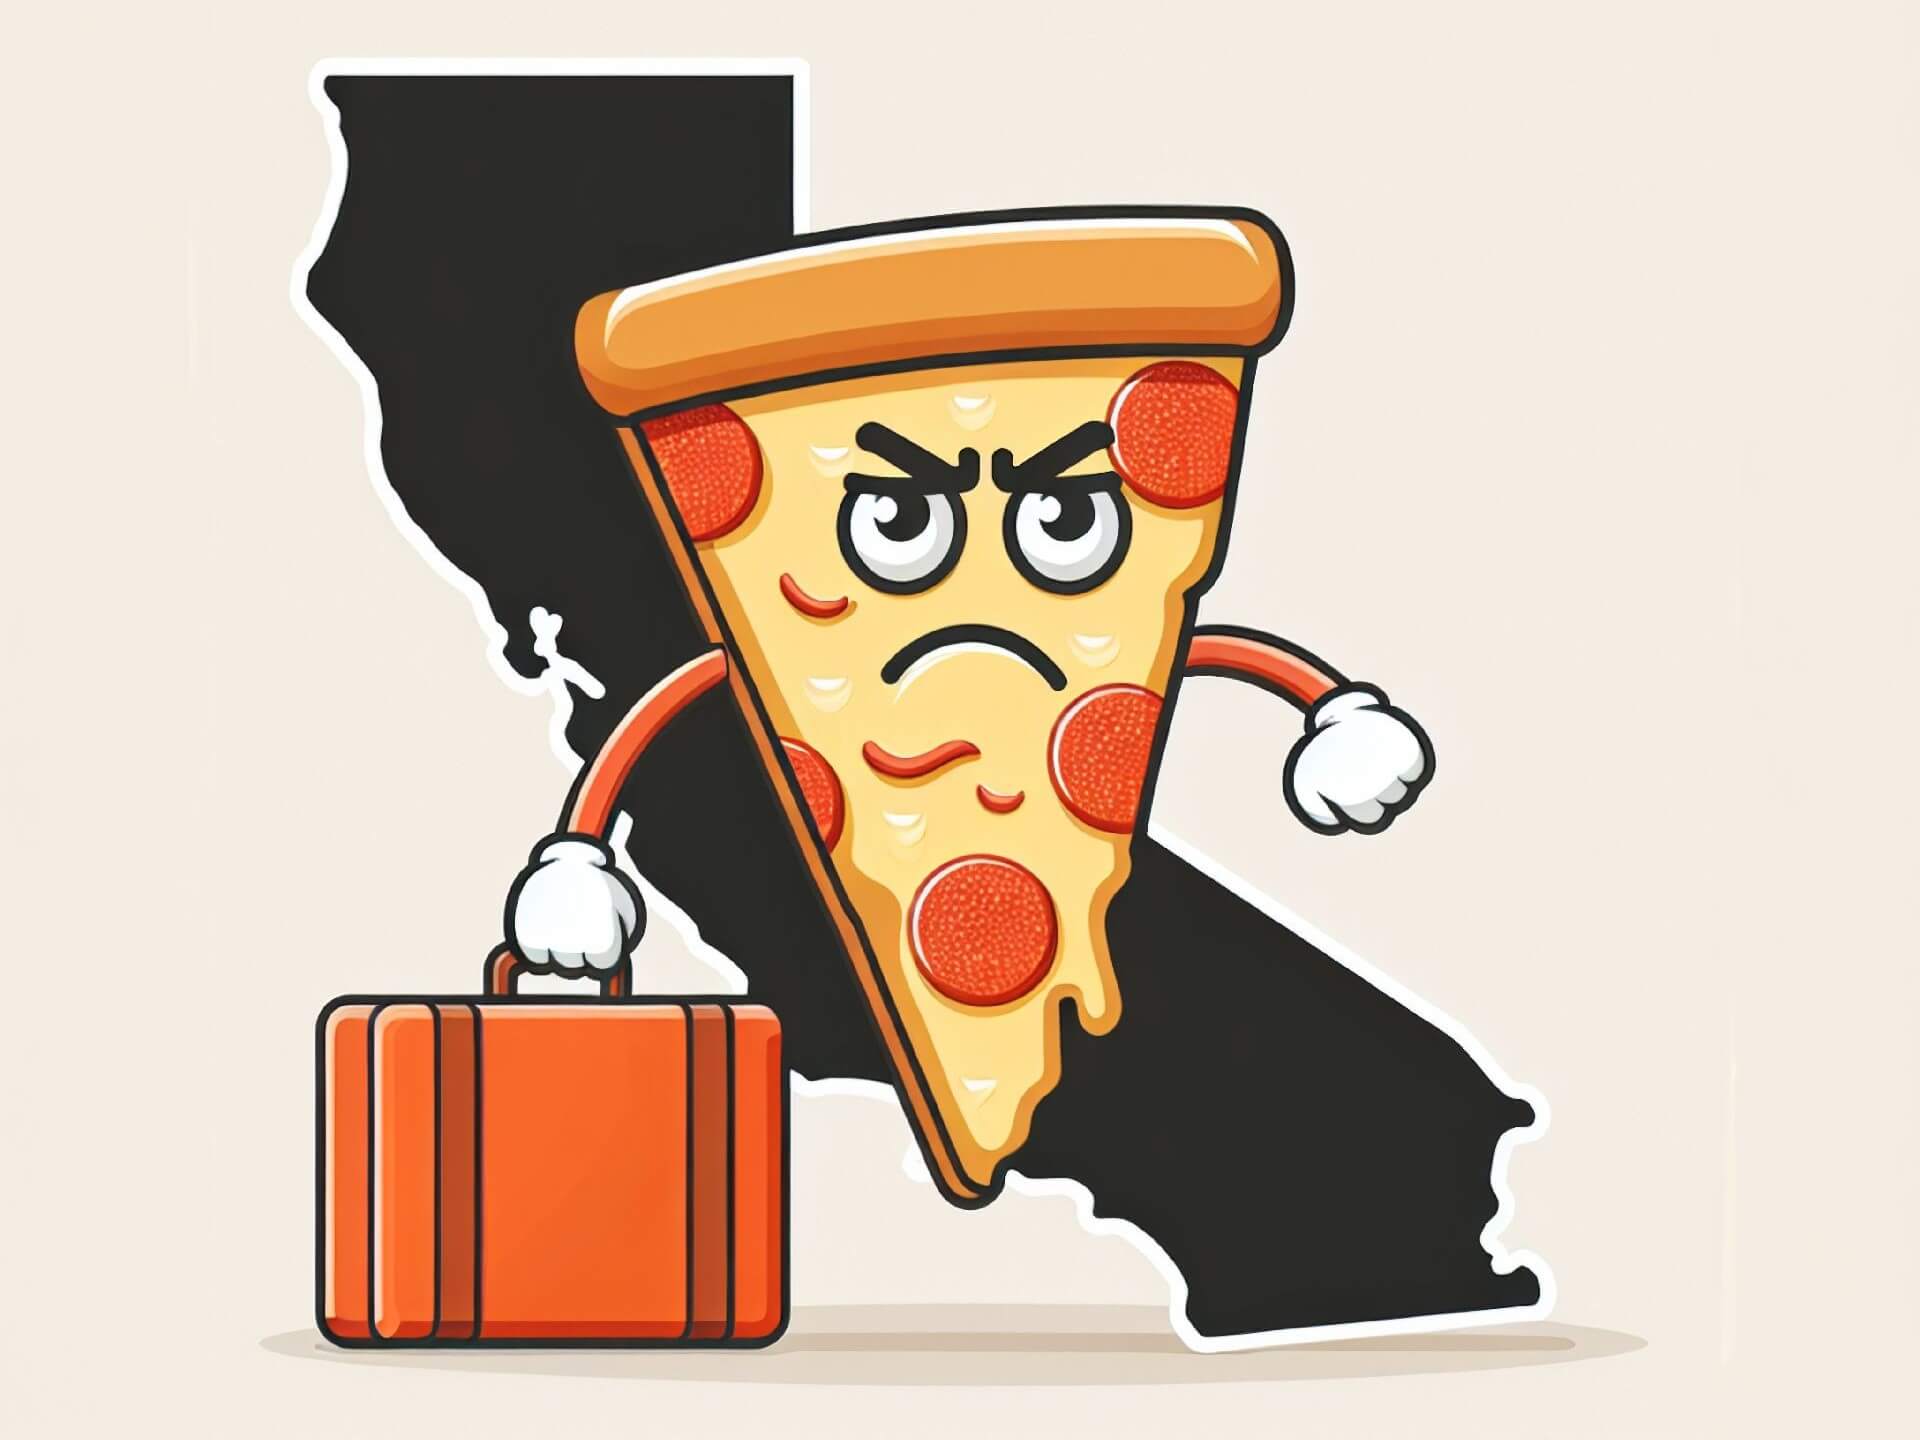 A frustrated cartoon slice of pizza carrying a suitcase and leaving the state of California